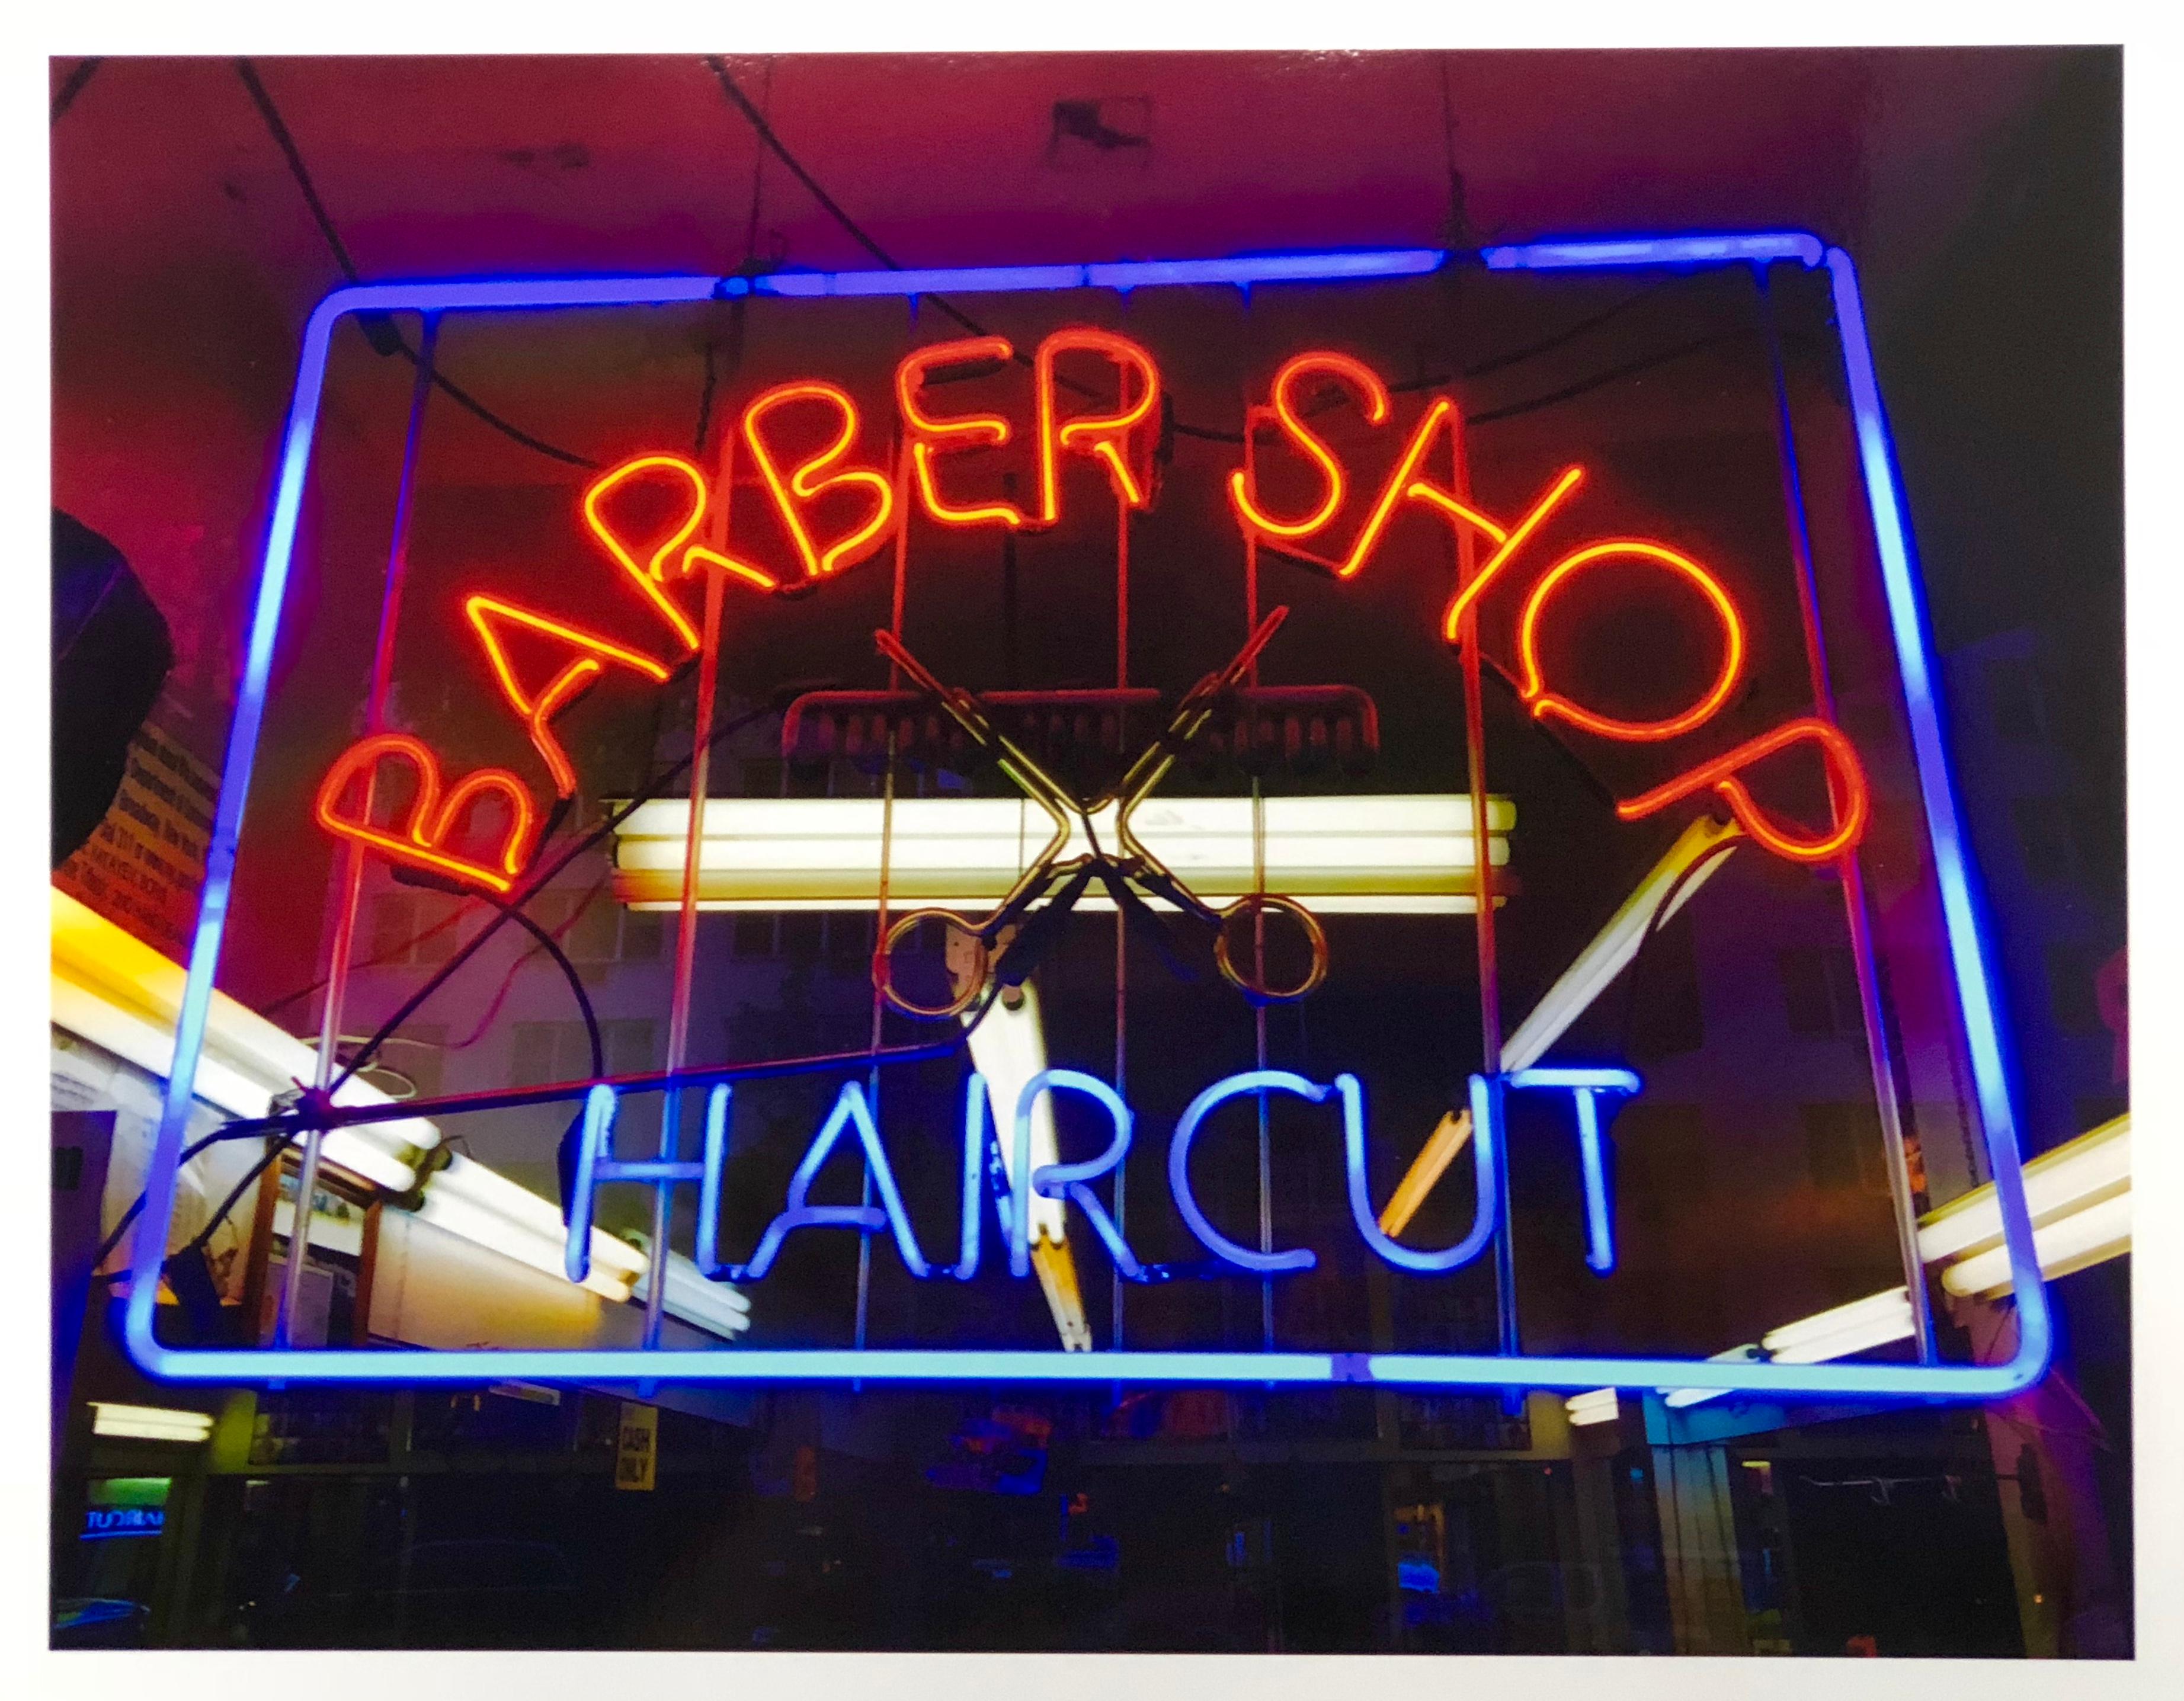 Barber Shop, New York - Neon Color Street Photography